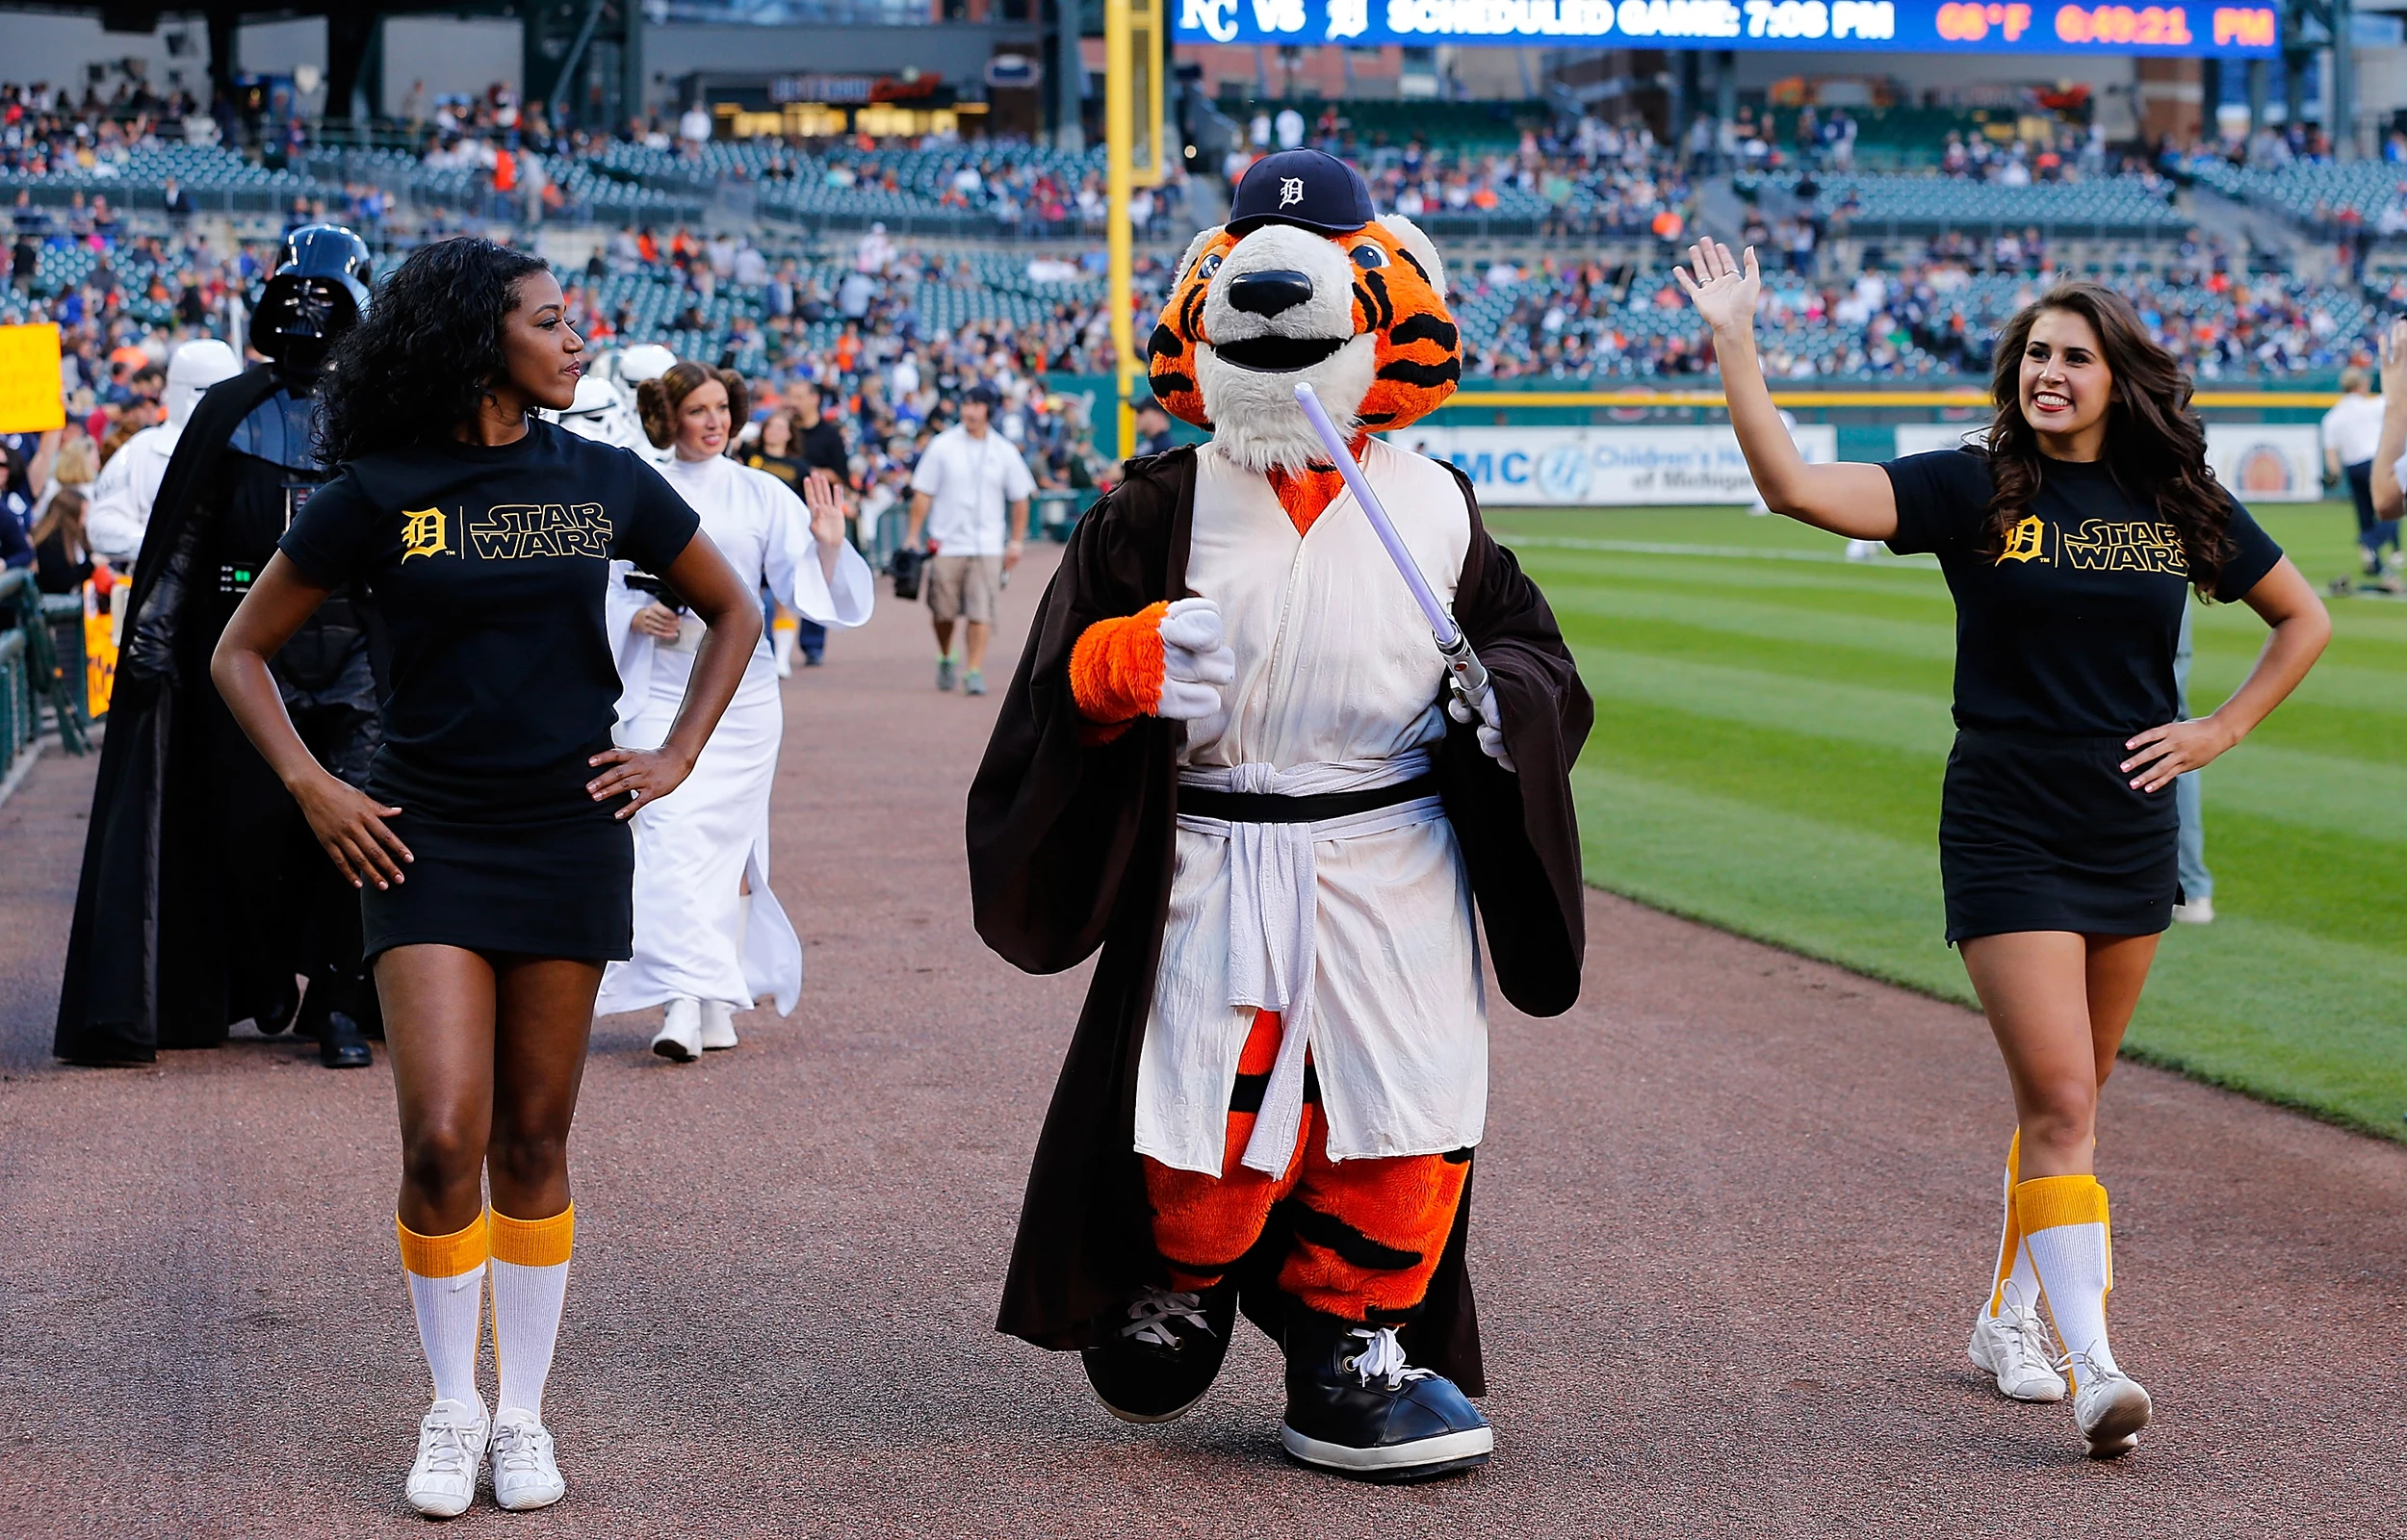 The San Diego Padres mascot the Swinging Friar looks on during a game  News Photo - Getty Images